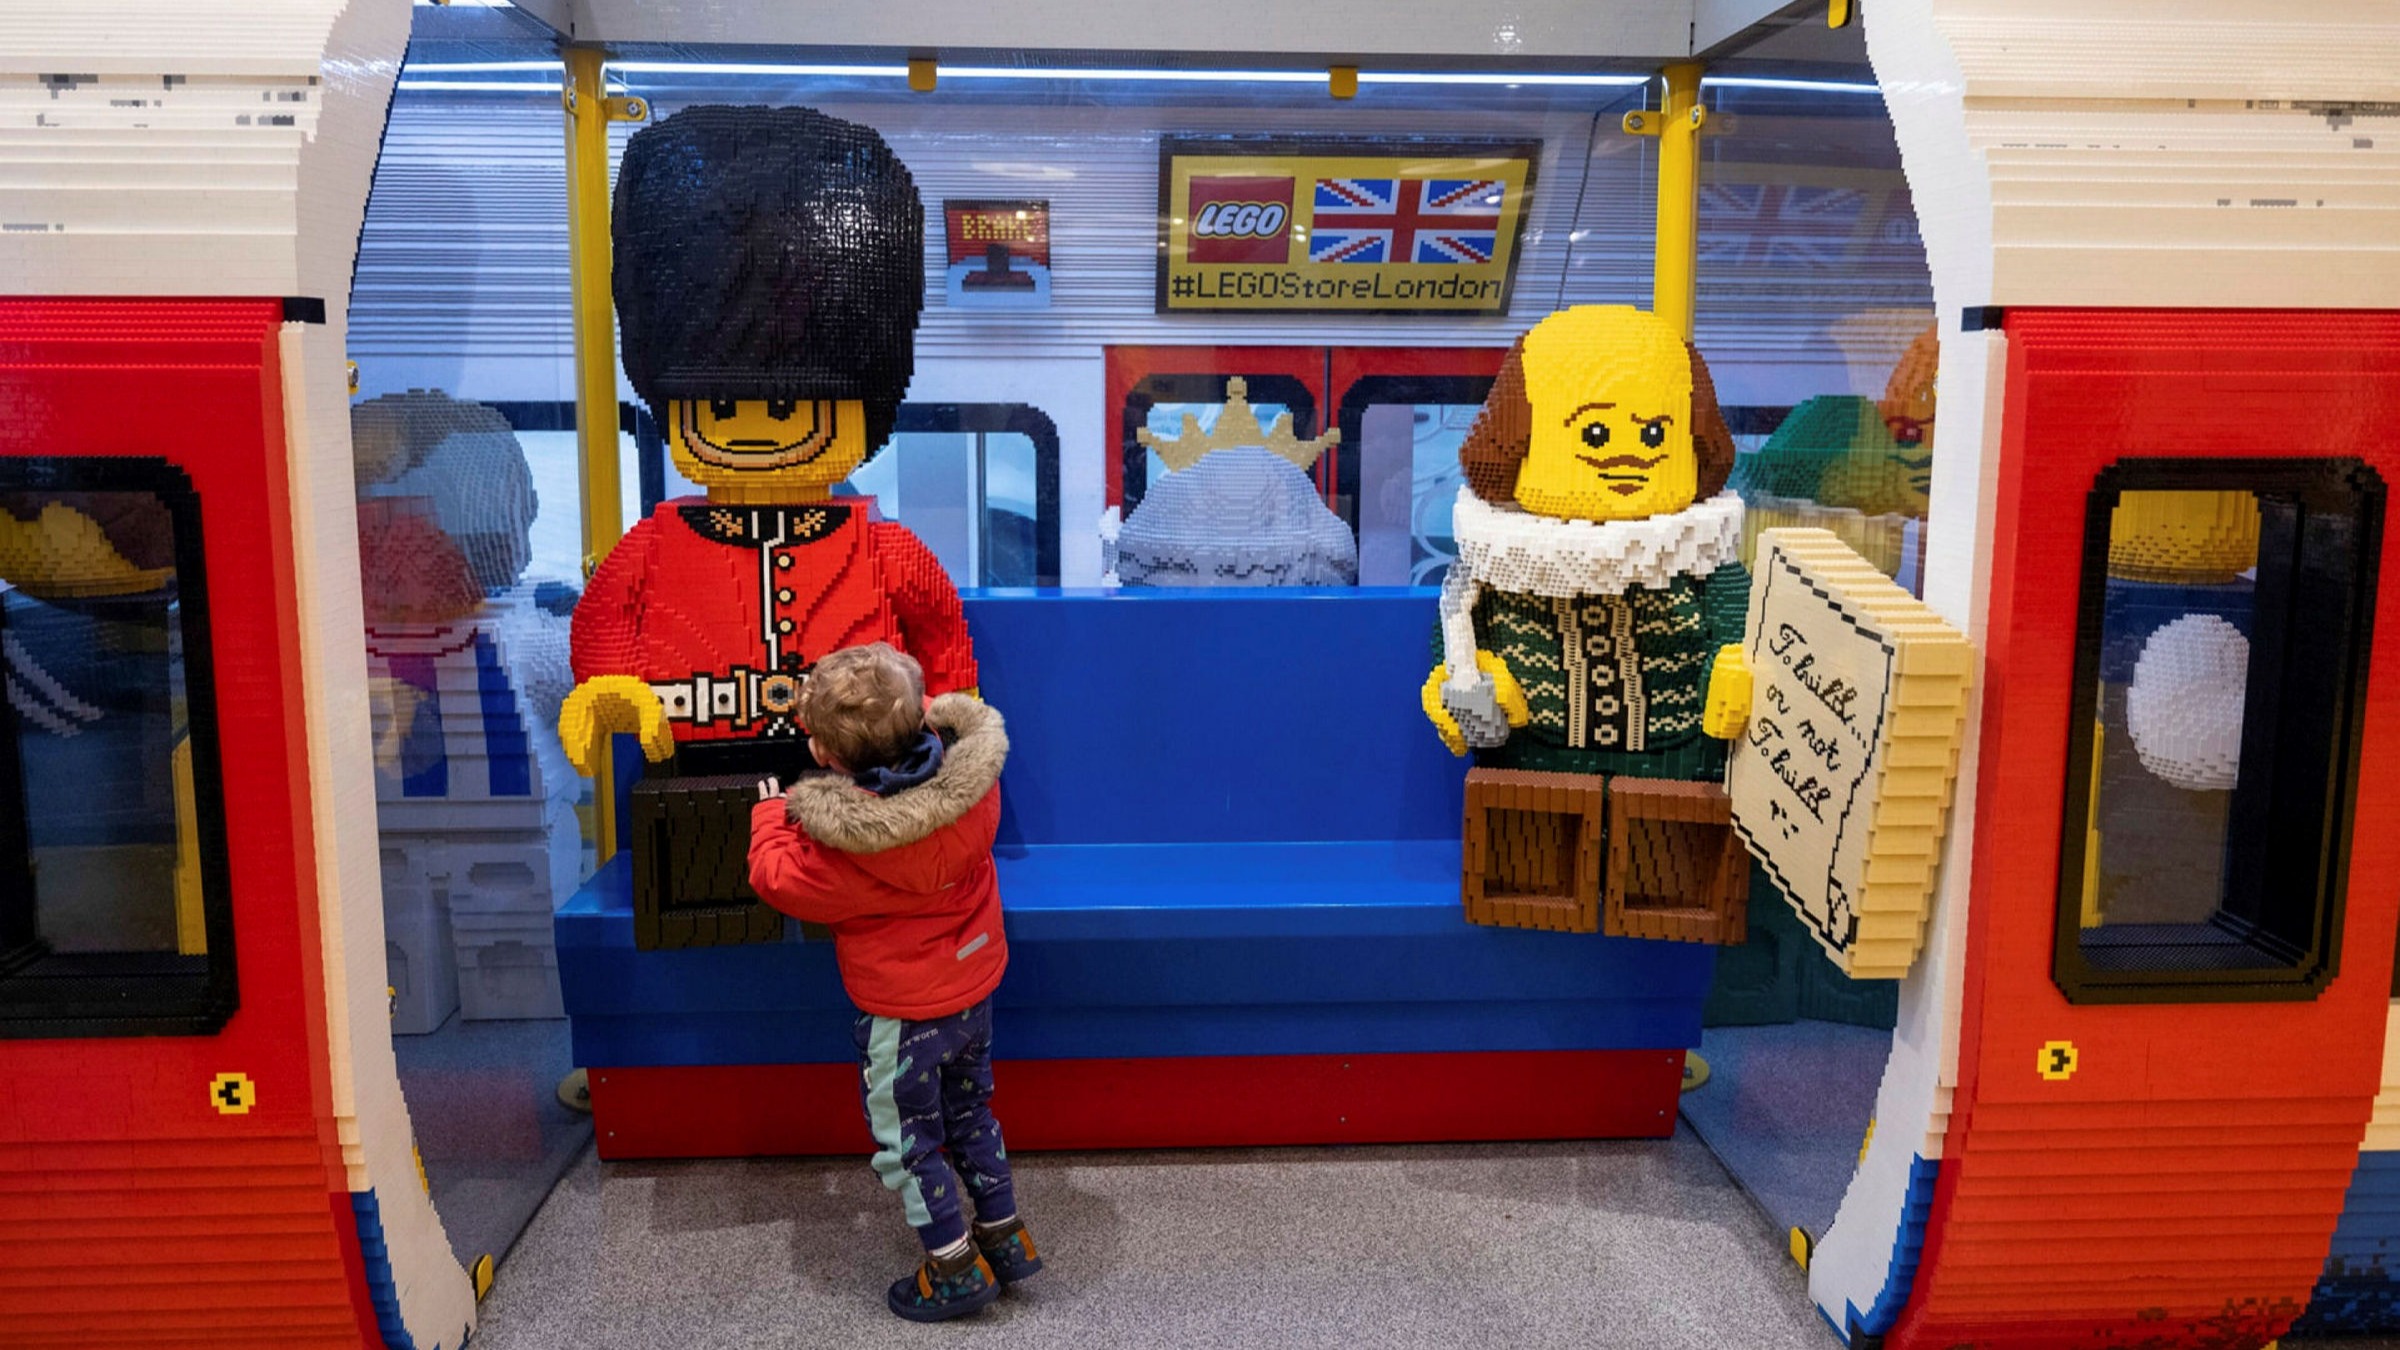 Lego to expand online ambitions by tripling total of software engineers | Times